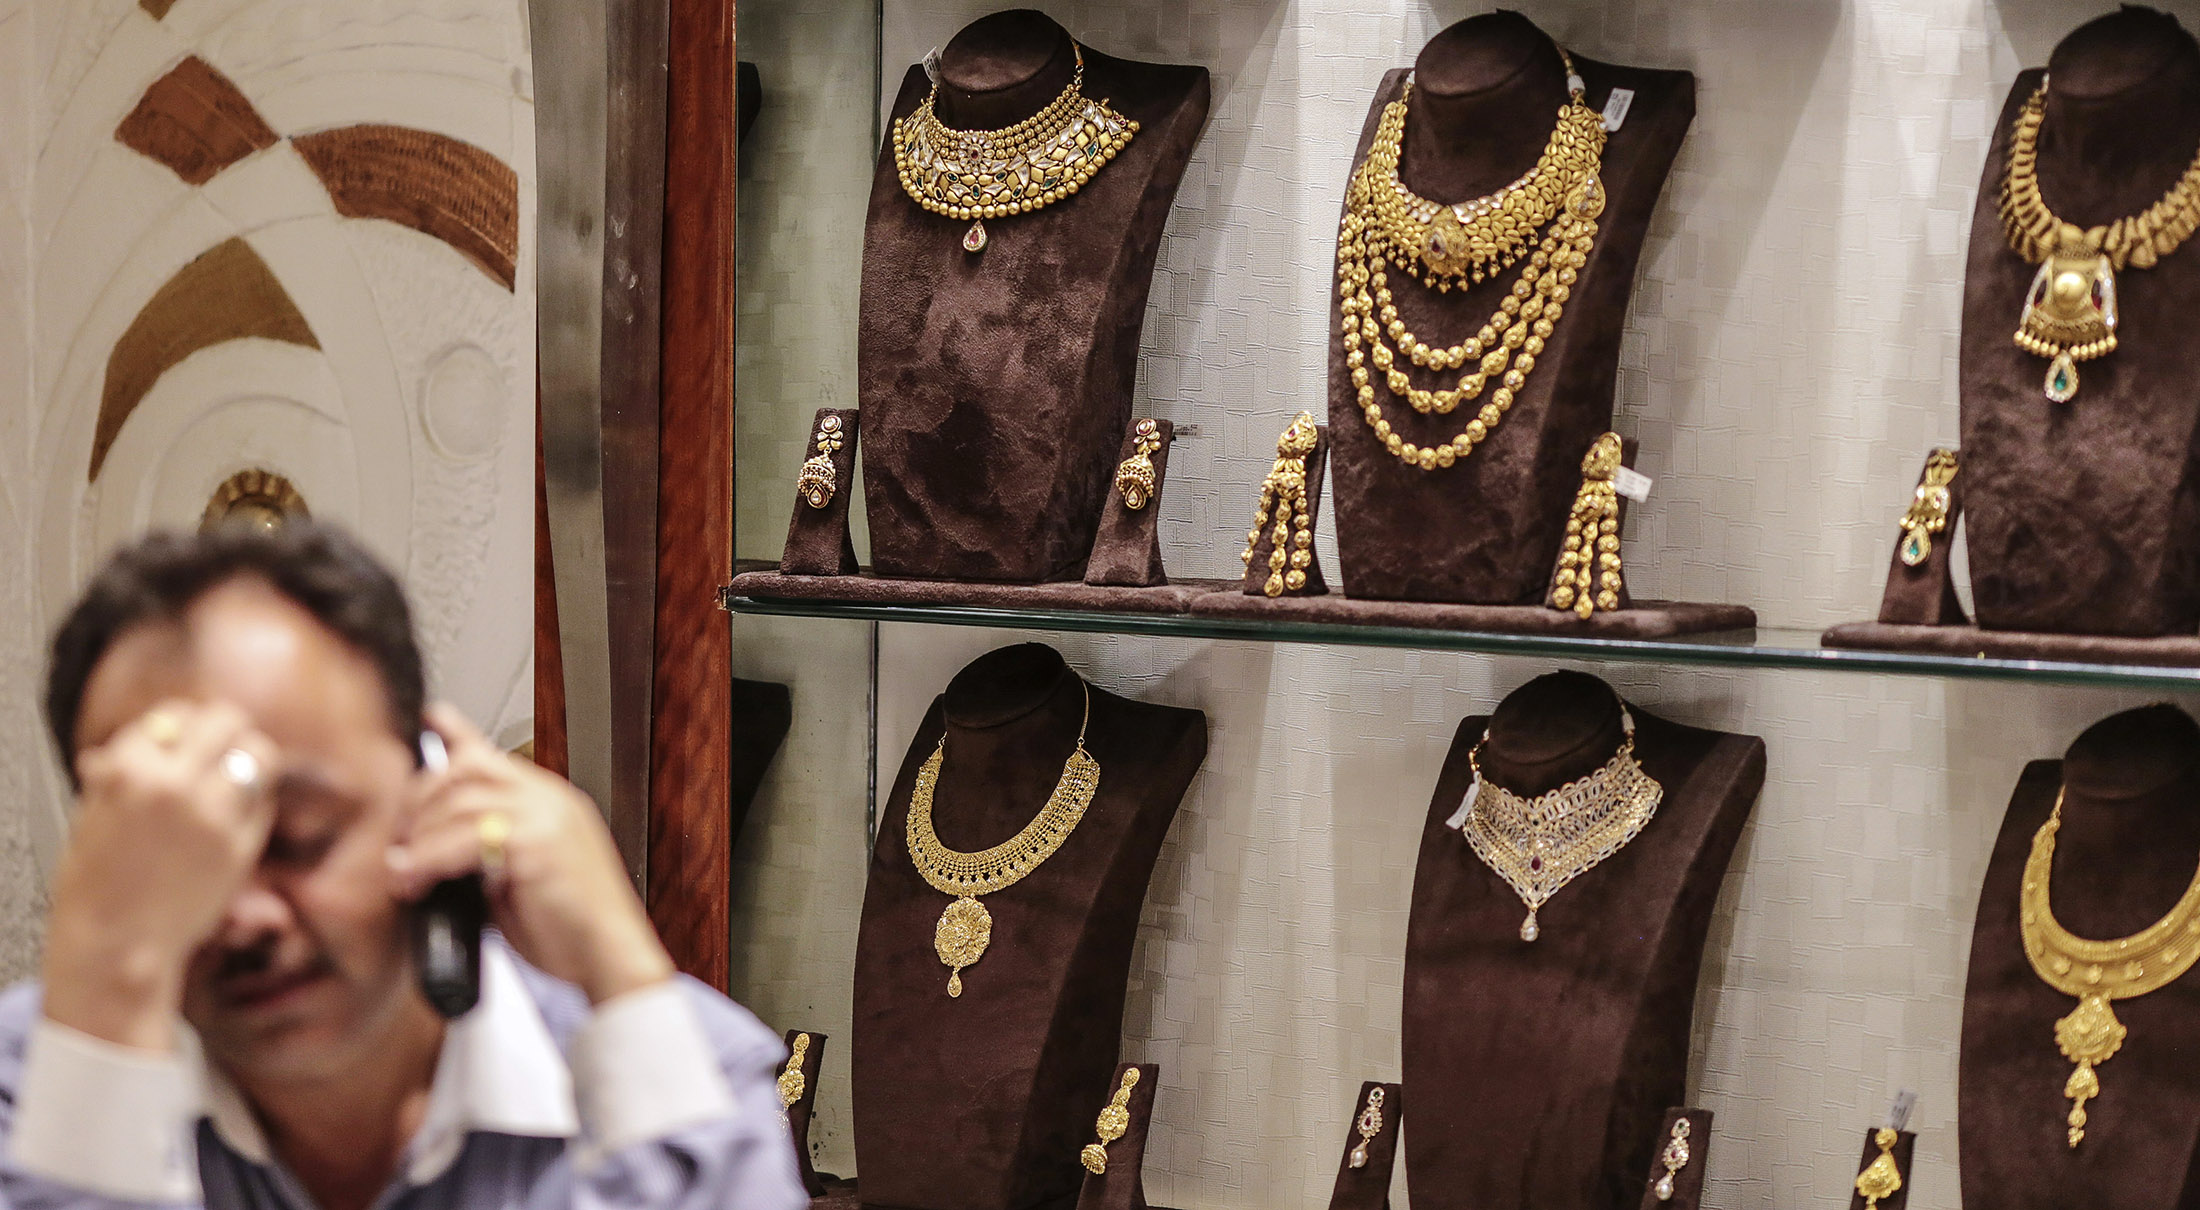 Gold necklaces sit on display as an employee talks on the phone inside the Dwarkadas Chandumal Jewelers store in the Zaveri Bazaar area of Mumbai, India, on April 21, 2015.
